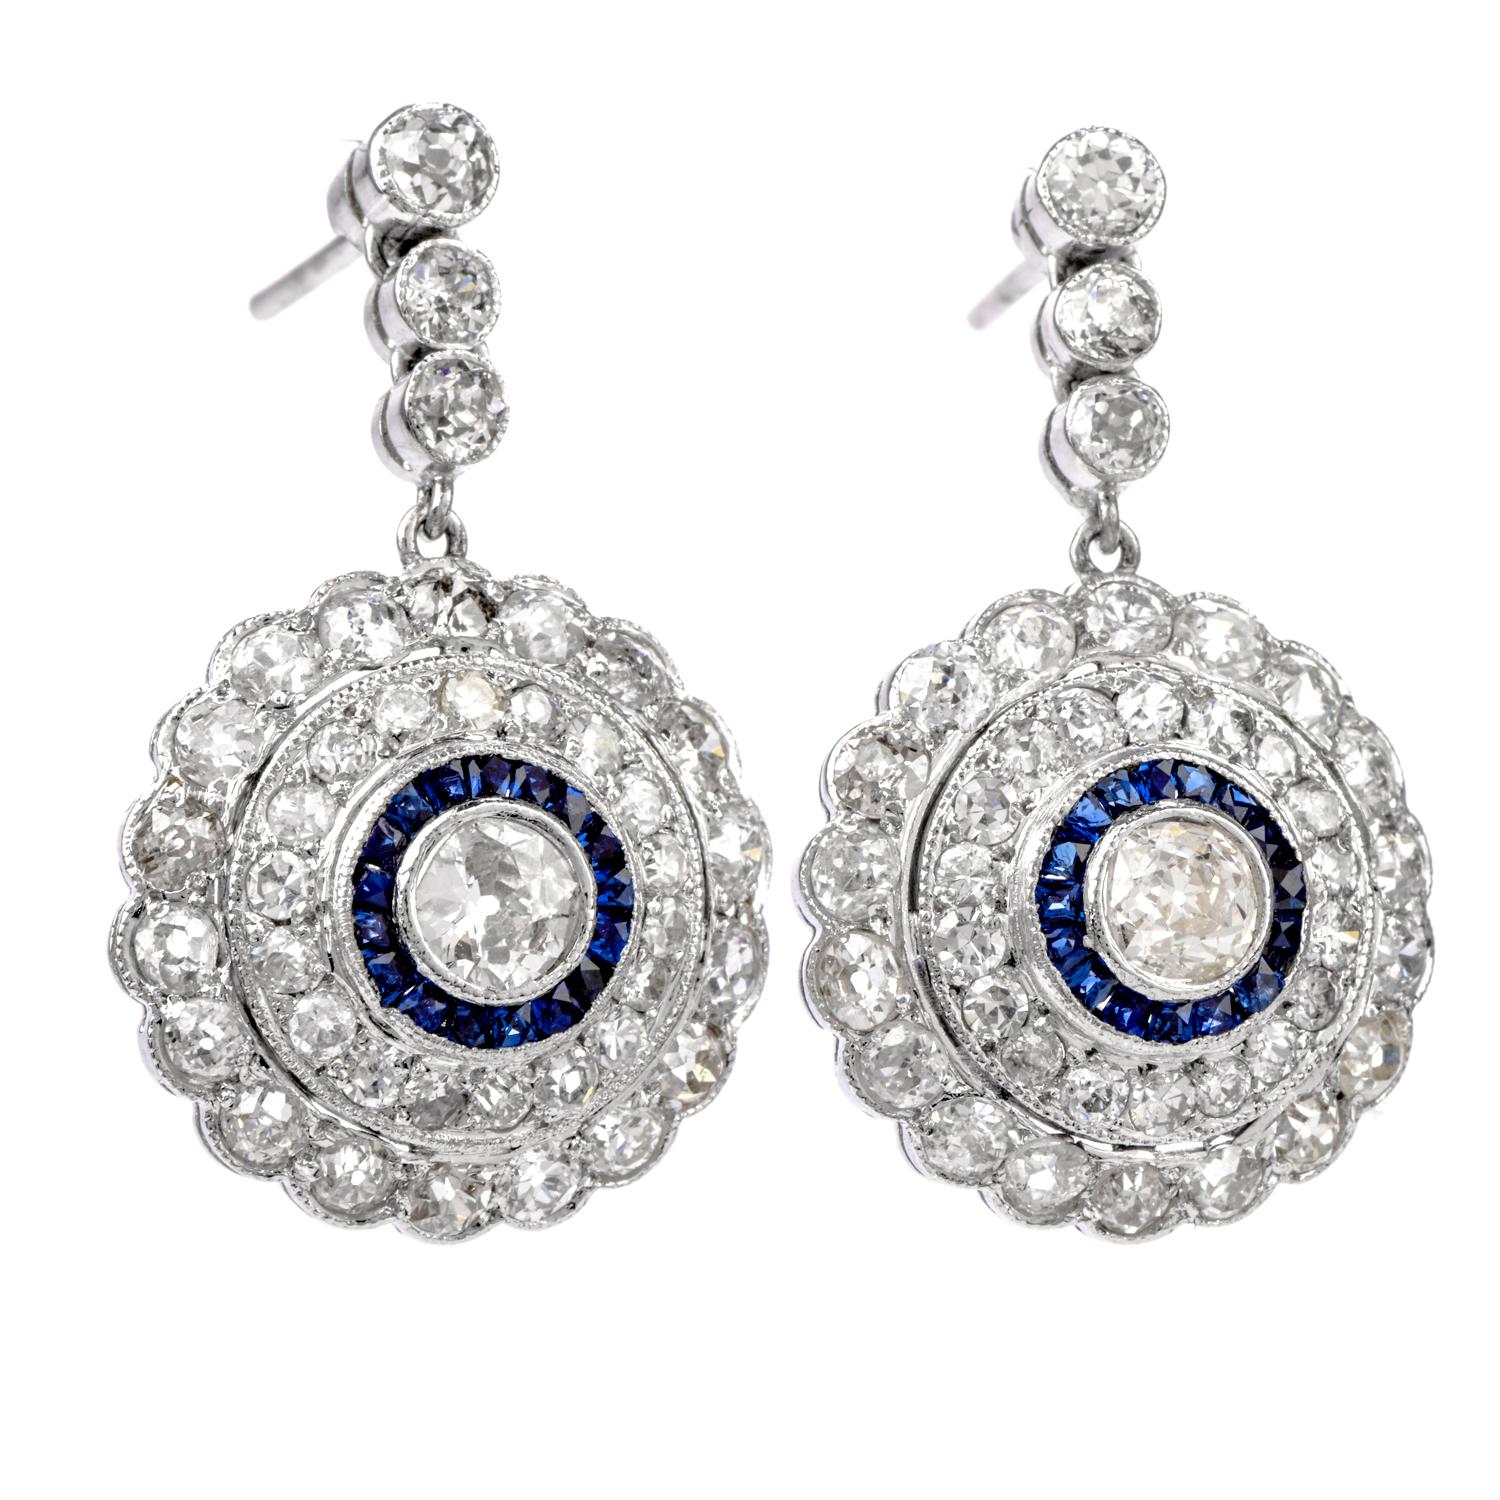 Exquisite Art Deco design in a Beehive motif and crafted

in Luxurious Platinum.

Adorning the top and center of each is a round bezel set Old European 

cut diamond encirled and highlighted by  channel set

French cut Sapphires. Creating 2